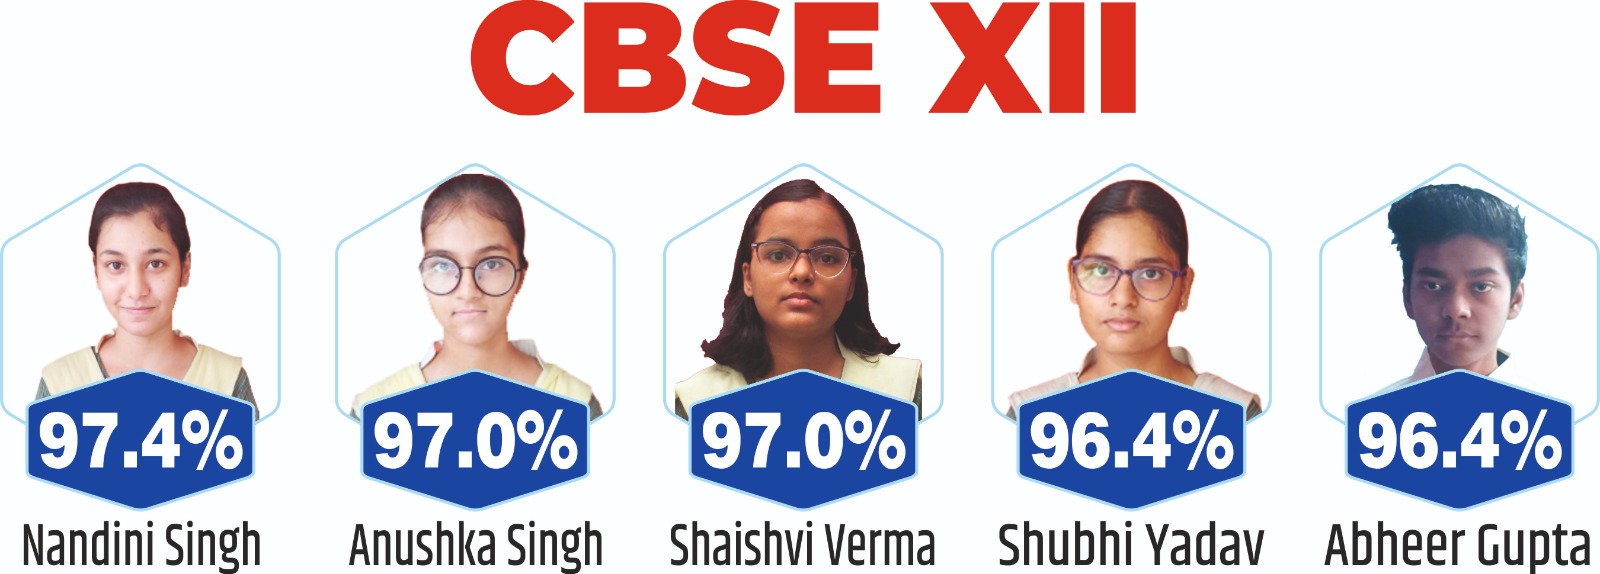 S.K.D. The exam result of Academy (Vrindavan Branch and Vikrant Khand Branch) CBSE Board-2024 was 100 percent this year also.